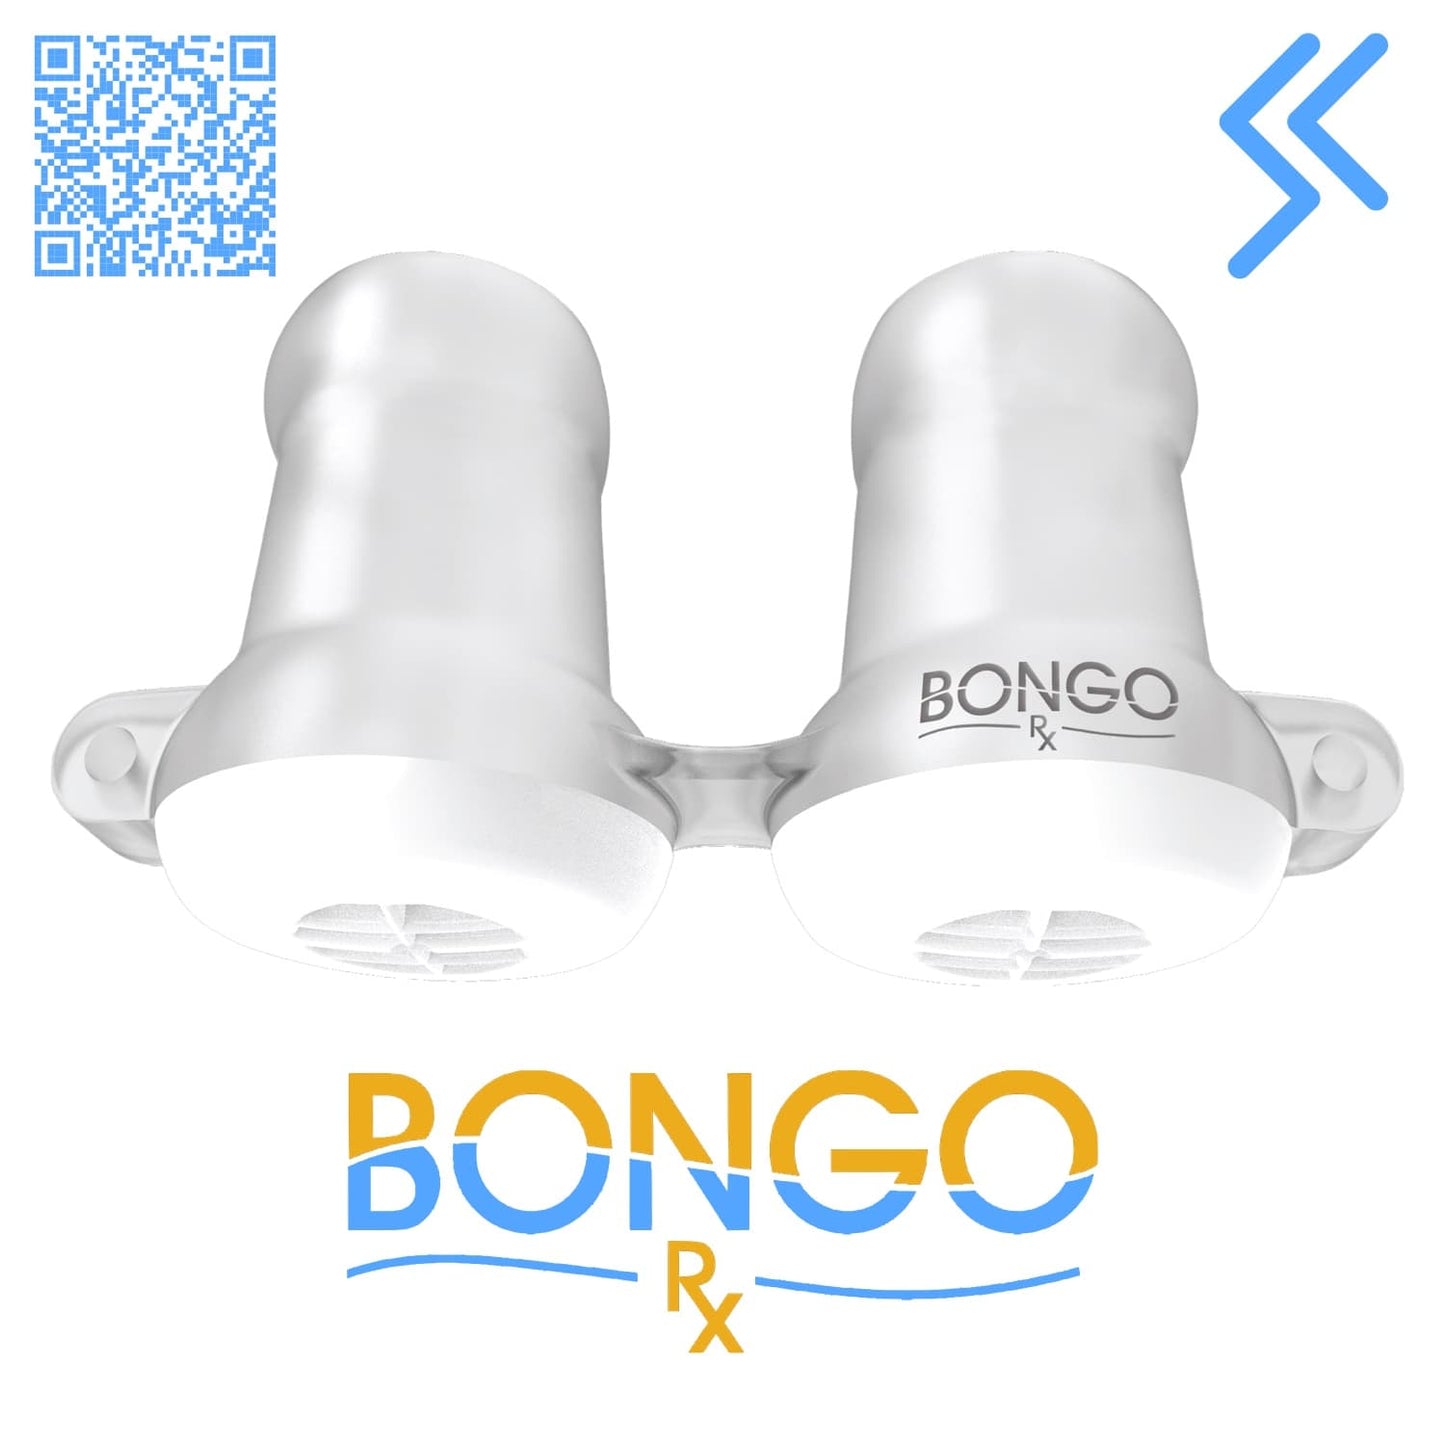 Bongo Rx - CPAP Alternative, Travel CPAP - All Sizes Starter Kit Bongo Rx - Sleep Therapy Device